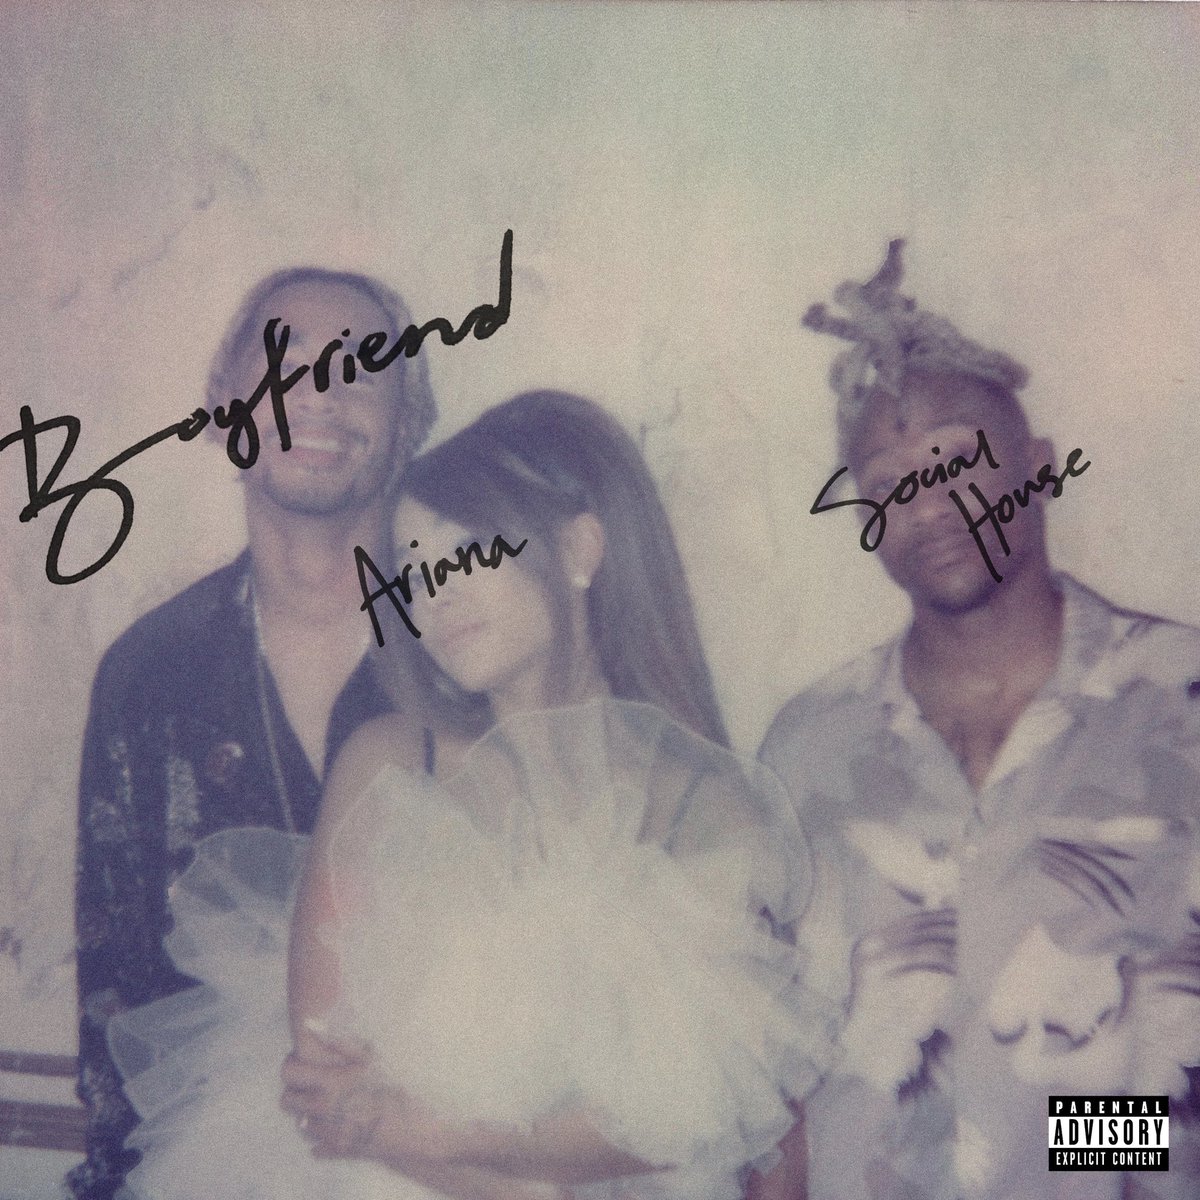 “boyfriend” by Ariana Grande & Social House has surpassed 800 MILLION streams on Spotify. It’s Grande’s 21st and Social House’s first song to achieve this.